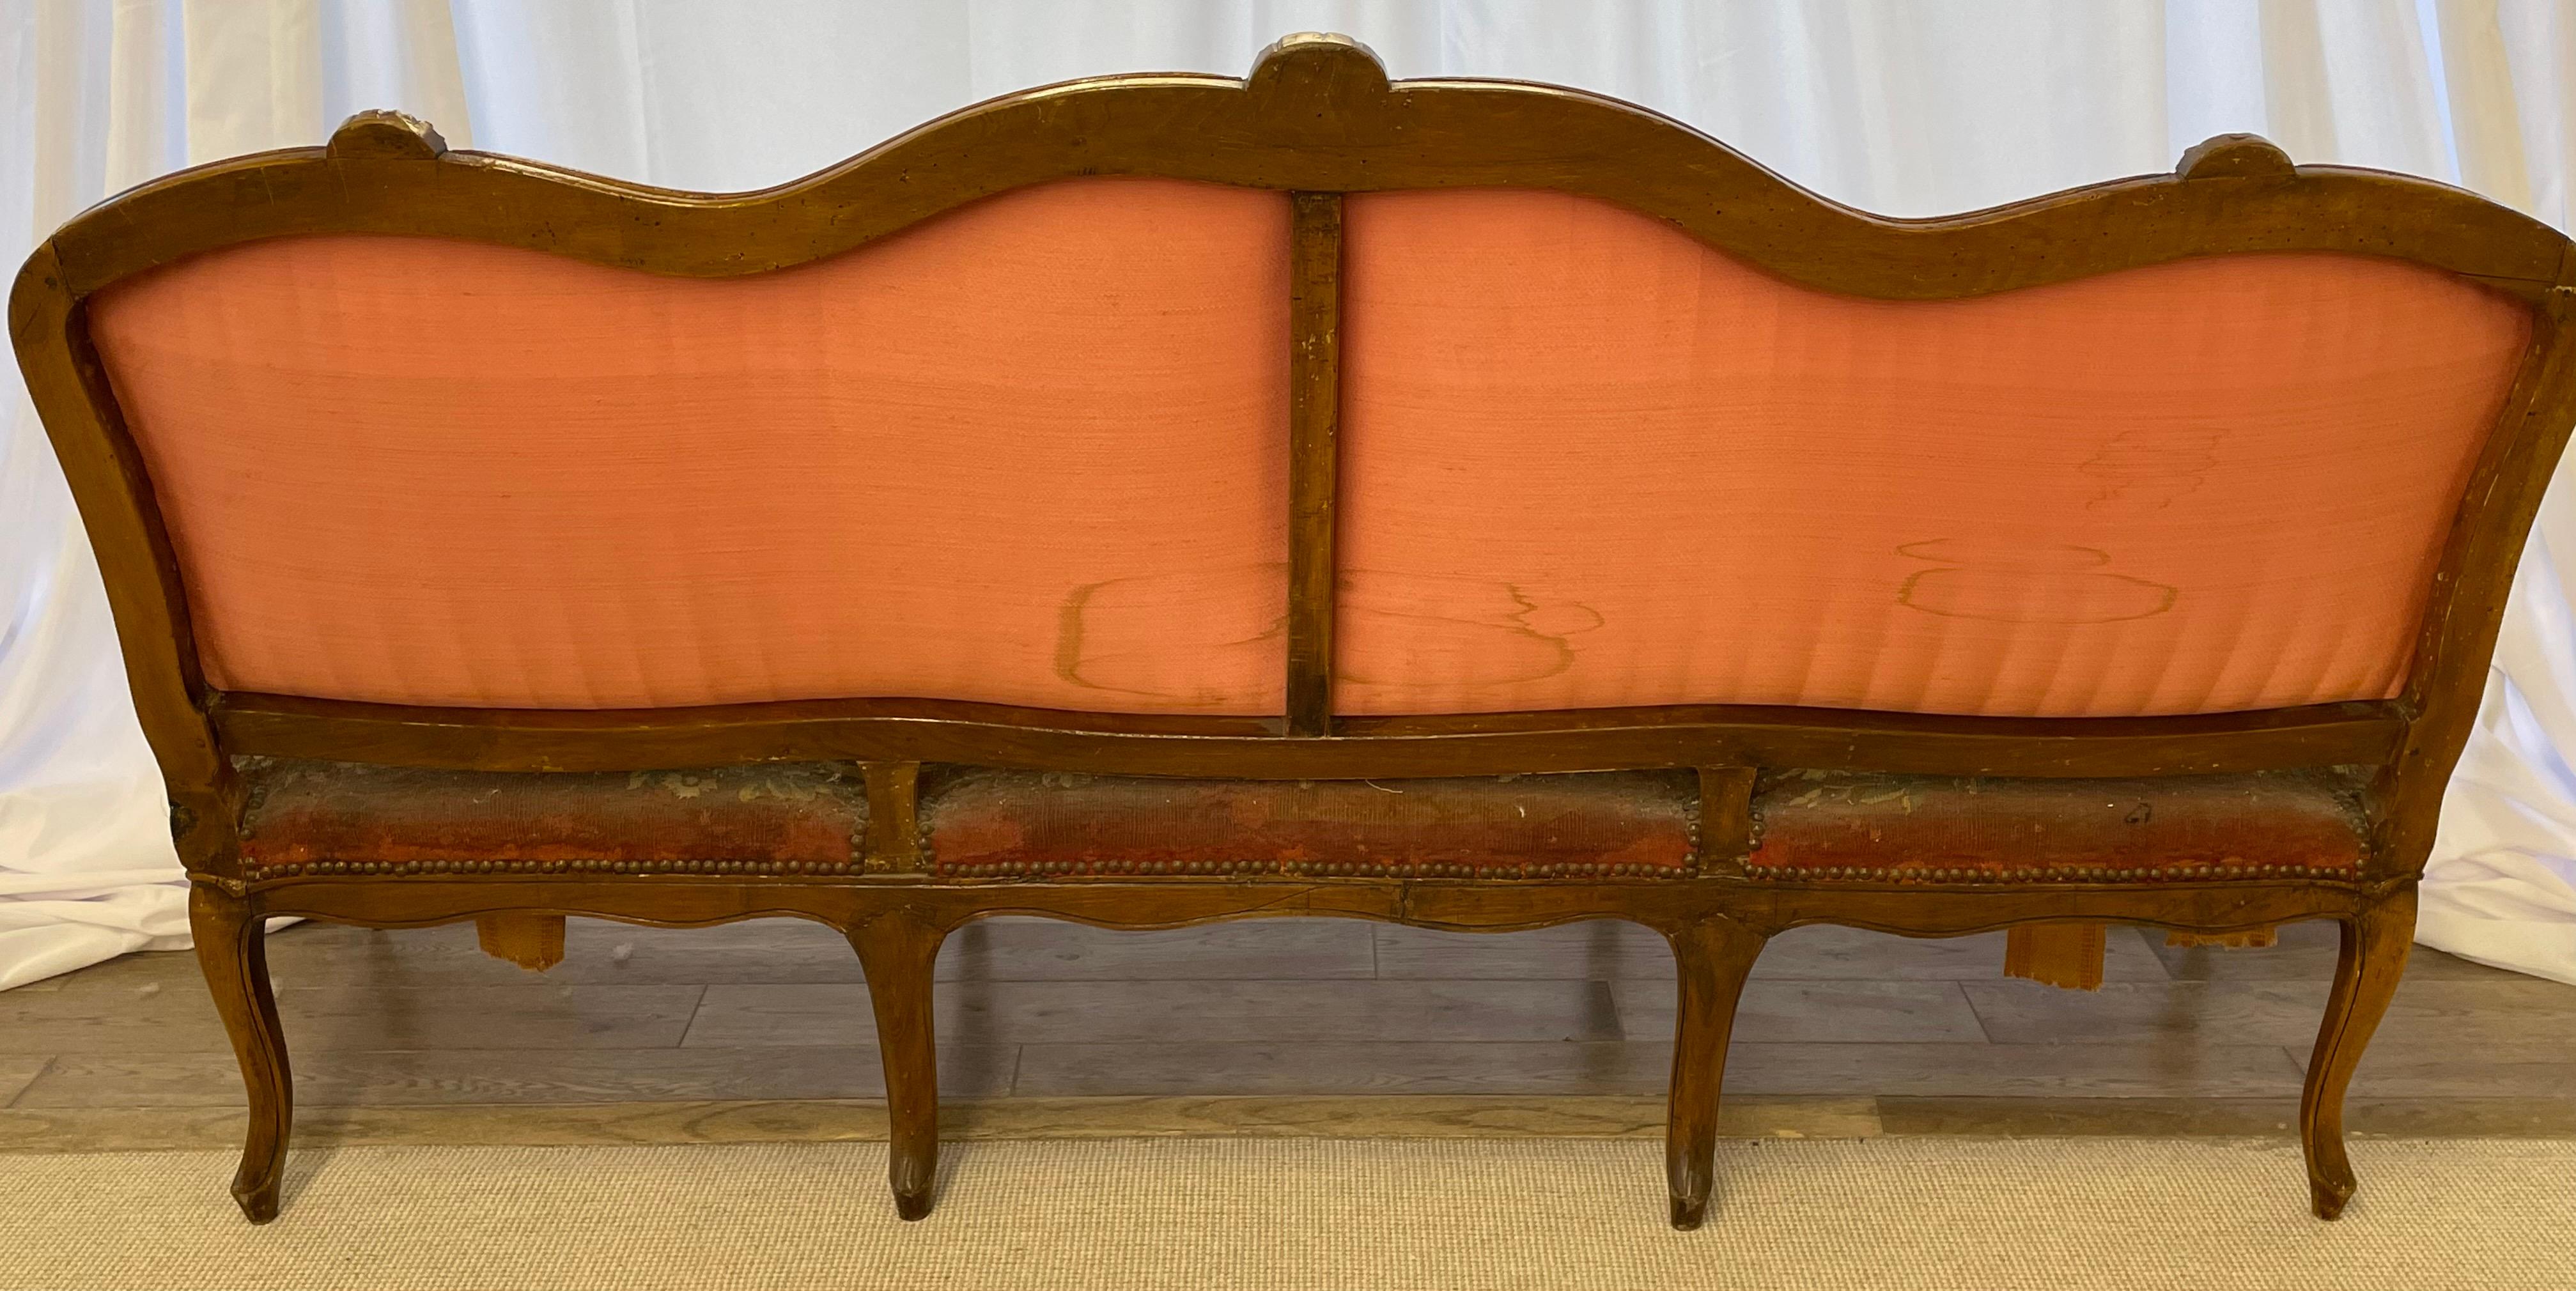 18th Century Louis XV Fruitwood Settee in Aubusson Upholstery For Sale 5